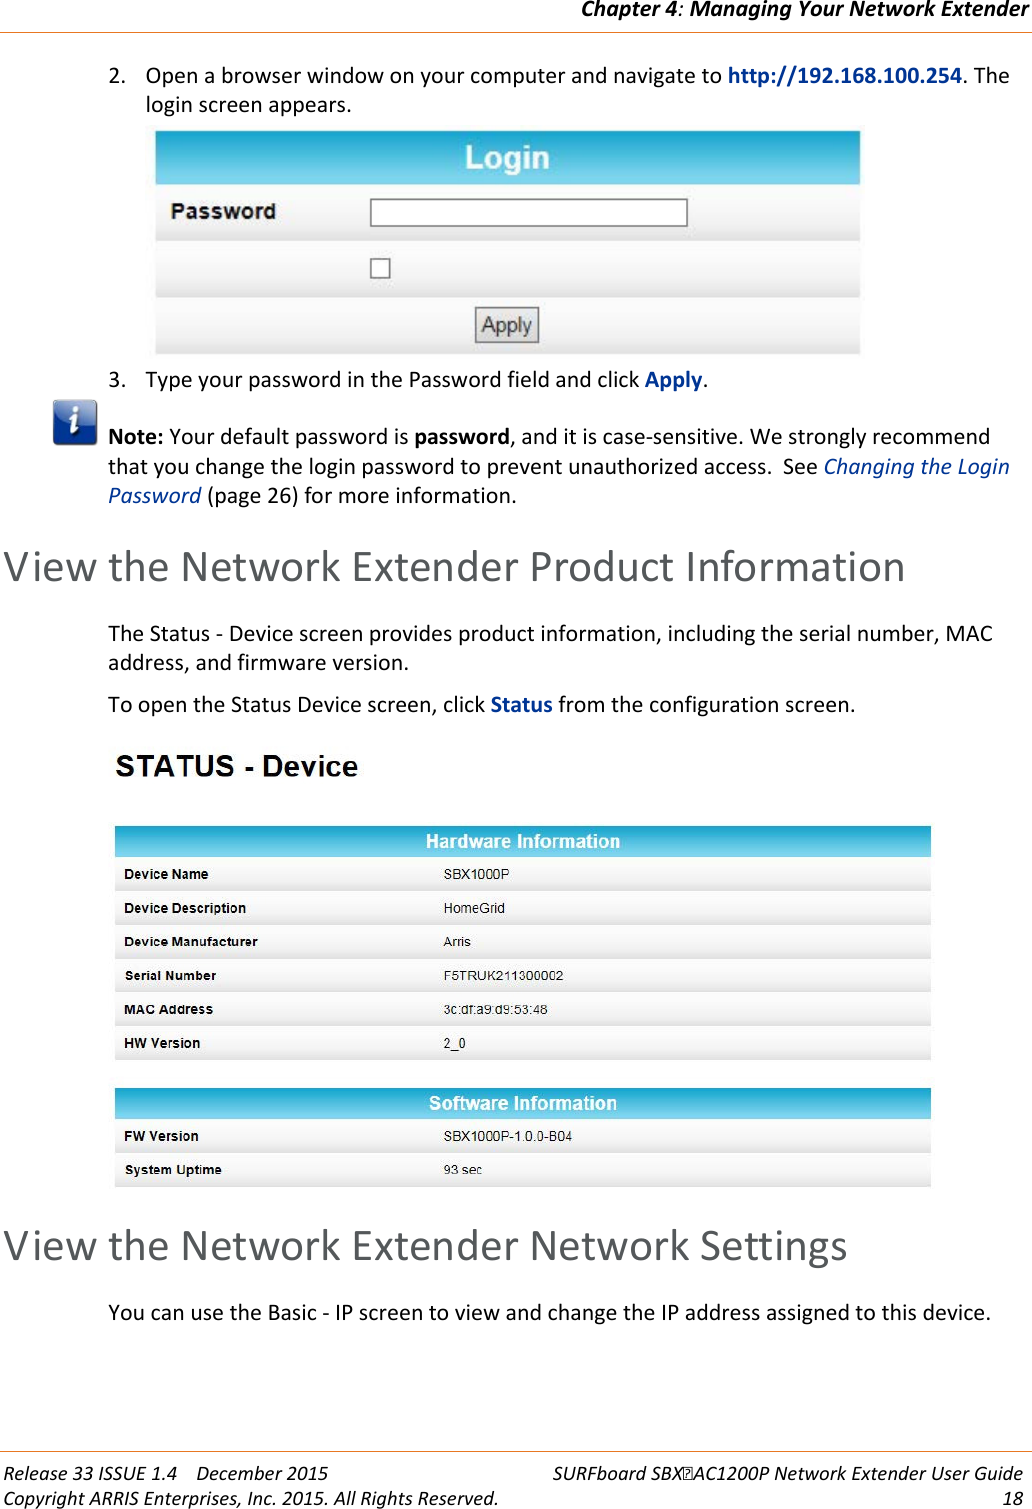 Chapter 4: Managing Your Network Extender  Release 33 ISSUE 1.4    December 2015 SURFboard SBXAC1200P Network Extender User Guide Copyright ARRIS Enterprises, Inc. 2015. All Rights Reserved. 18  2. Open a browser window on your computer and navigate to http://192.168.100.254. The login screen appears.  3. Type your password in the Password field and click Apply.  Note: Your default password is password, and it is case-sensitive. We strongly recommend that you change the login password to prevent unauthorized access.  See Changing the Login Password (page 26) for more information.   View the Network Extender Product Information The Status - Device screen provides product information, including the serial number, MAC address, and firmware version. To open the Status Device screen, click Status from the configuration screen.    View the Network Extender Network Settings You can use the Basic - IP screen to view and change the IP address assigned to this device. 